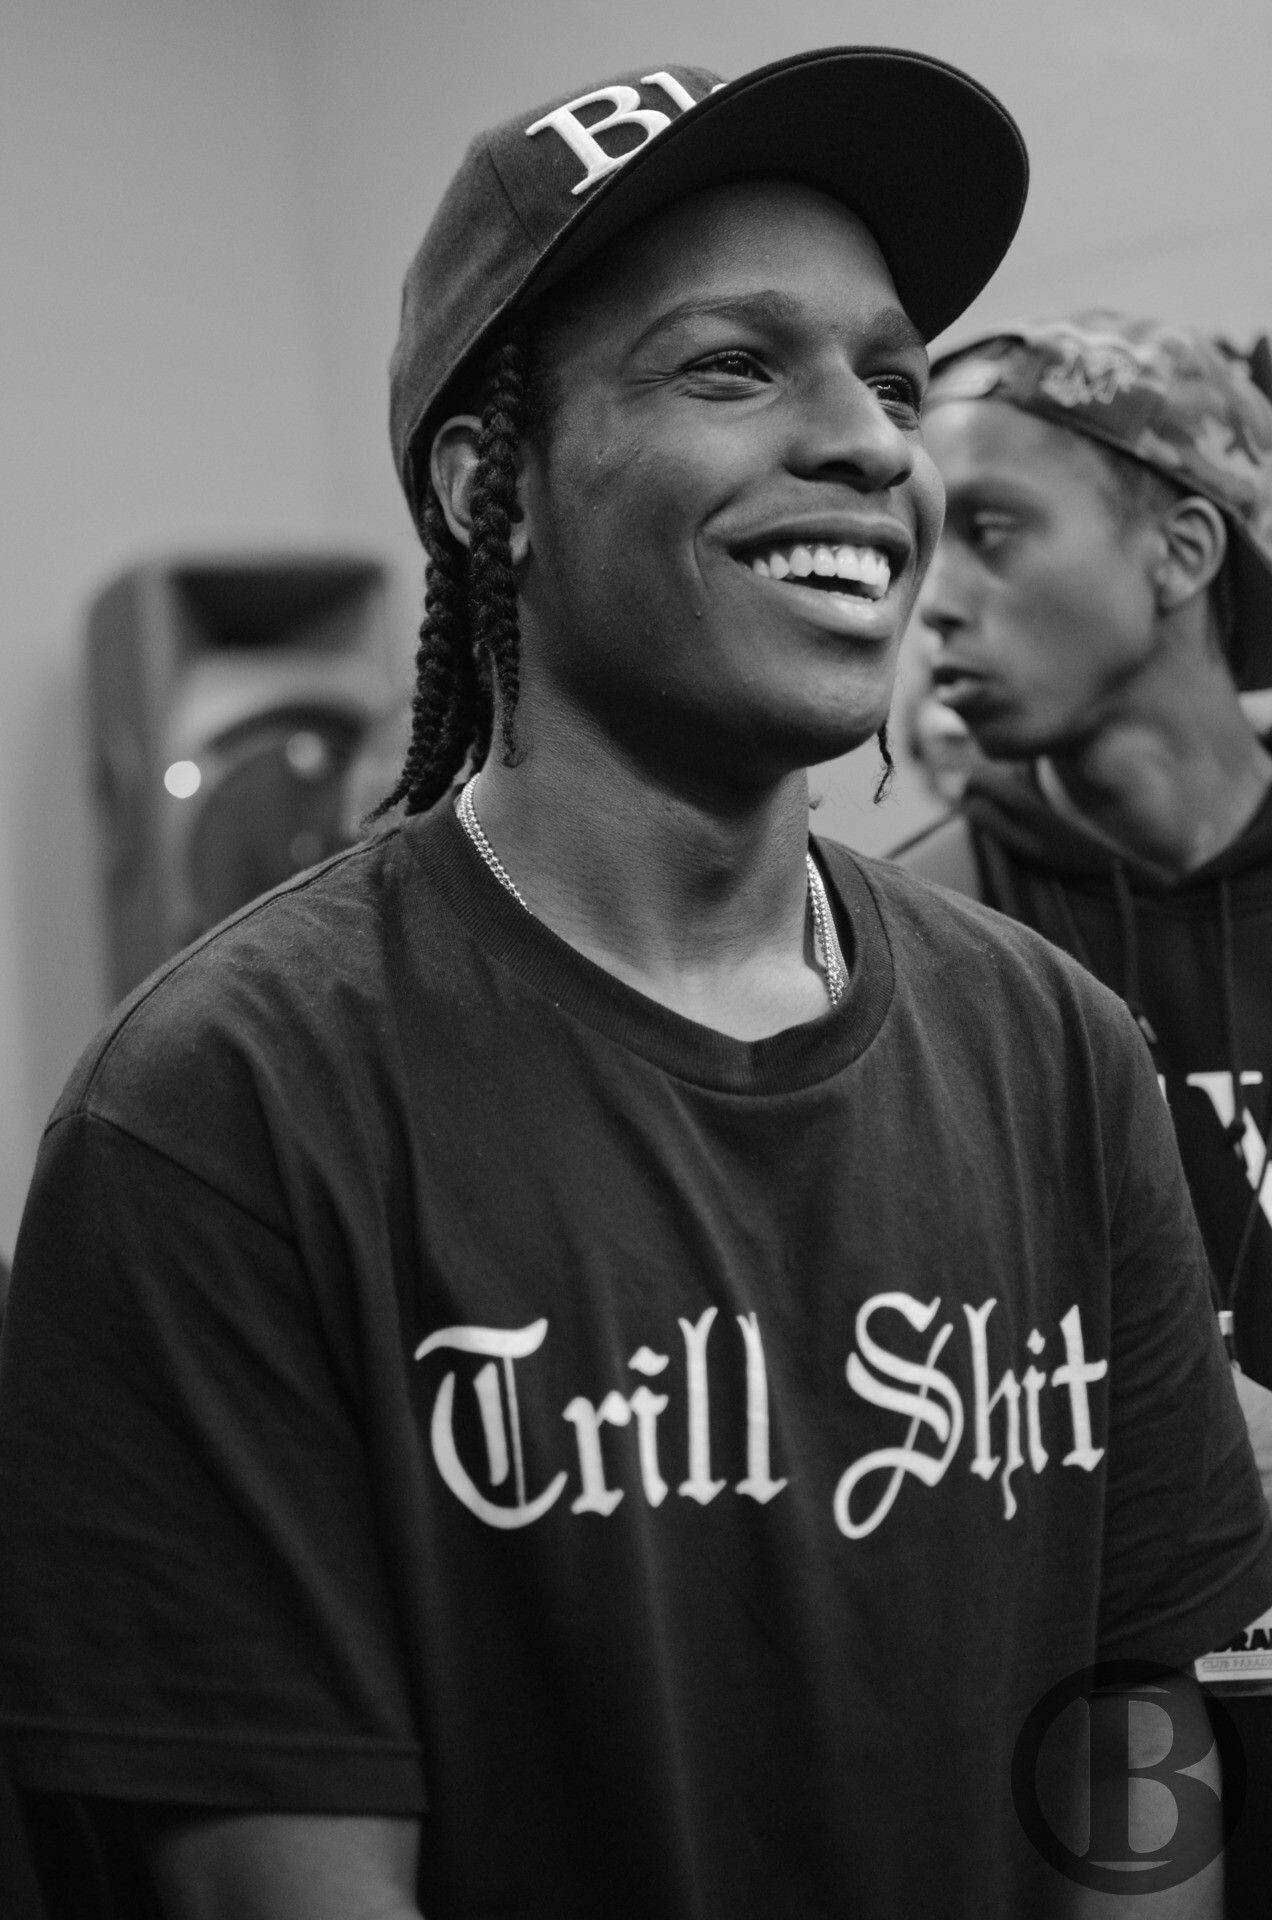 A candid photo of ASAP Rocky looking dashing. Wallpaper